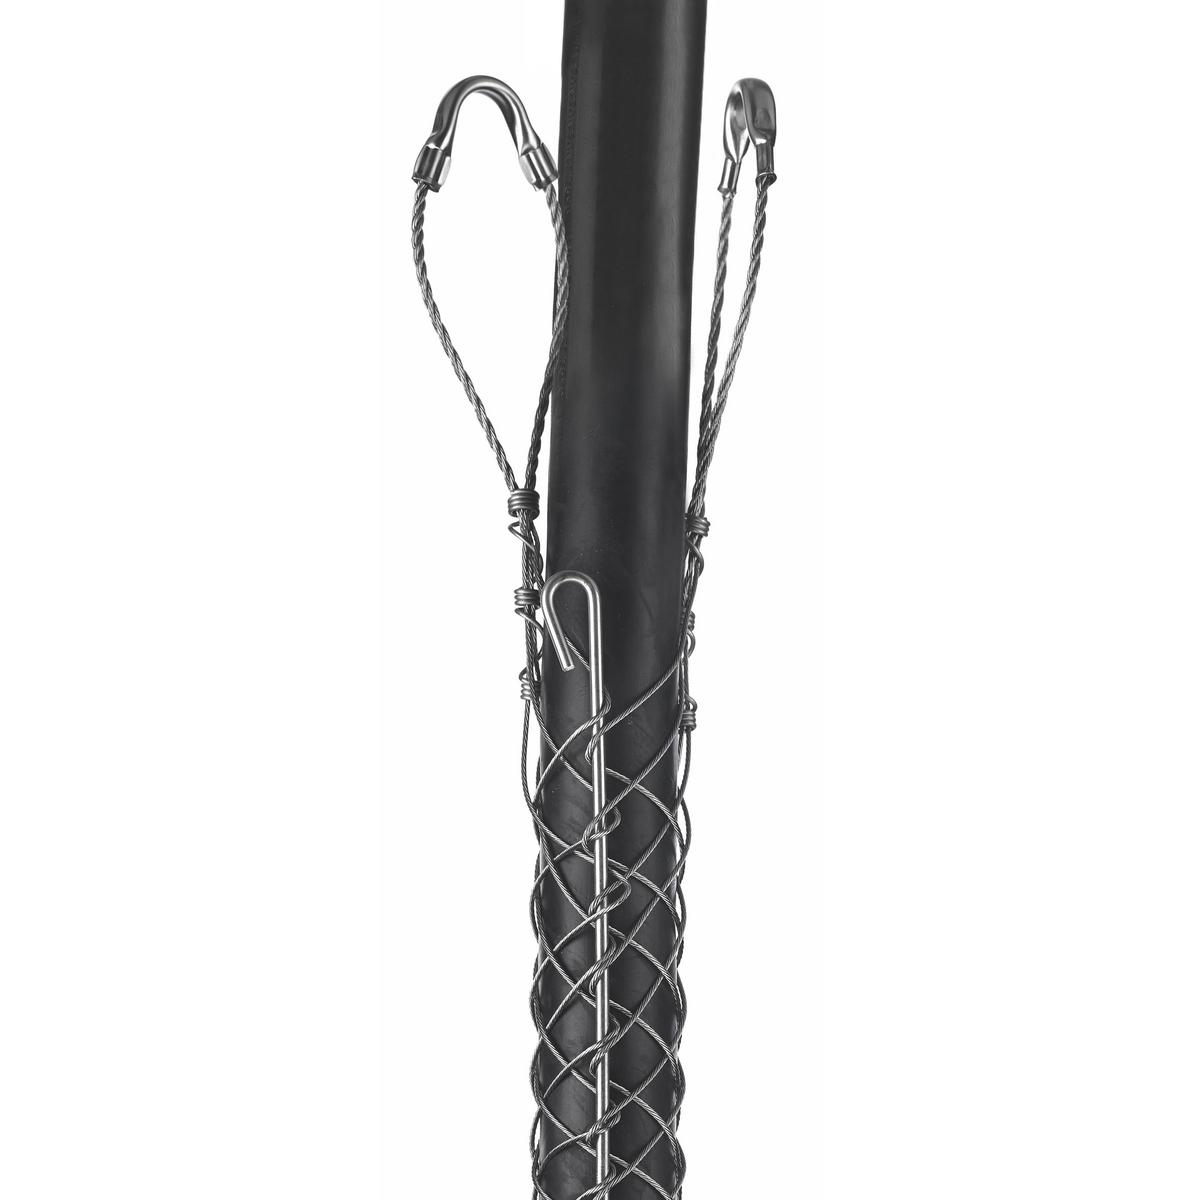 Hubbell 02403010 Support Grips, Double Eye, Single Weave, Split Mesh, Rod Closing, Stainless Steel, 2.50-2.99"  ; Double eye ; Strand equalizers position wires for equal loading throughout grip length ; Eye assemblies provide eye reinforcement at support hardware ; Split 